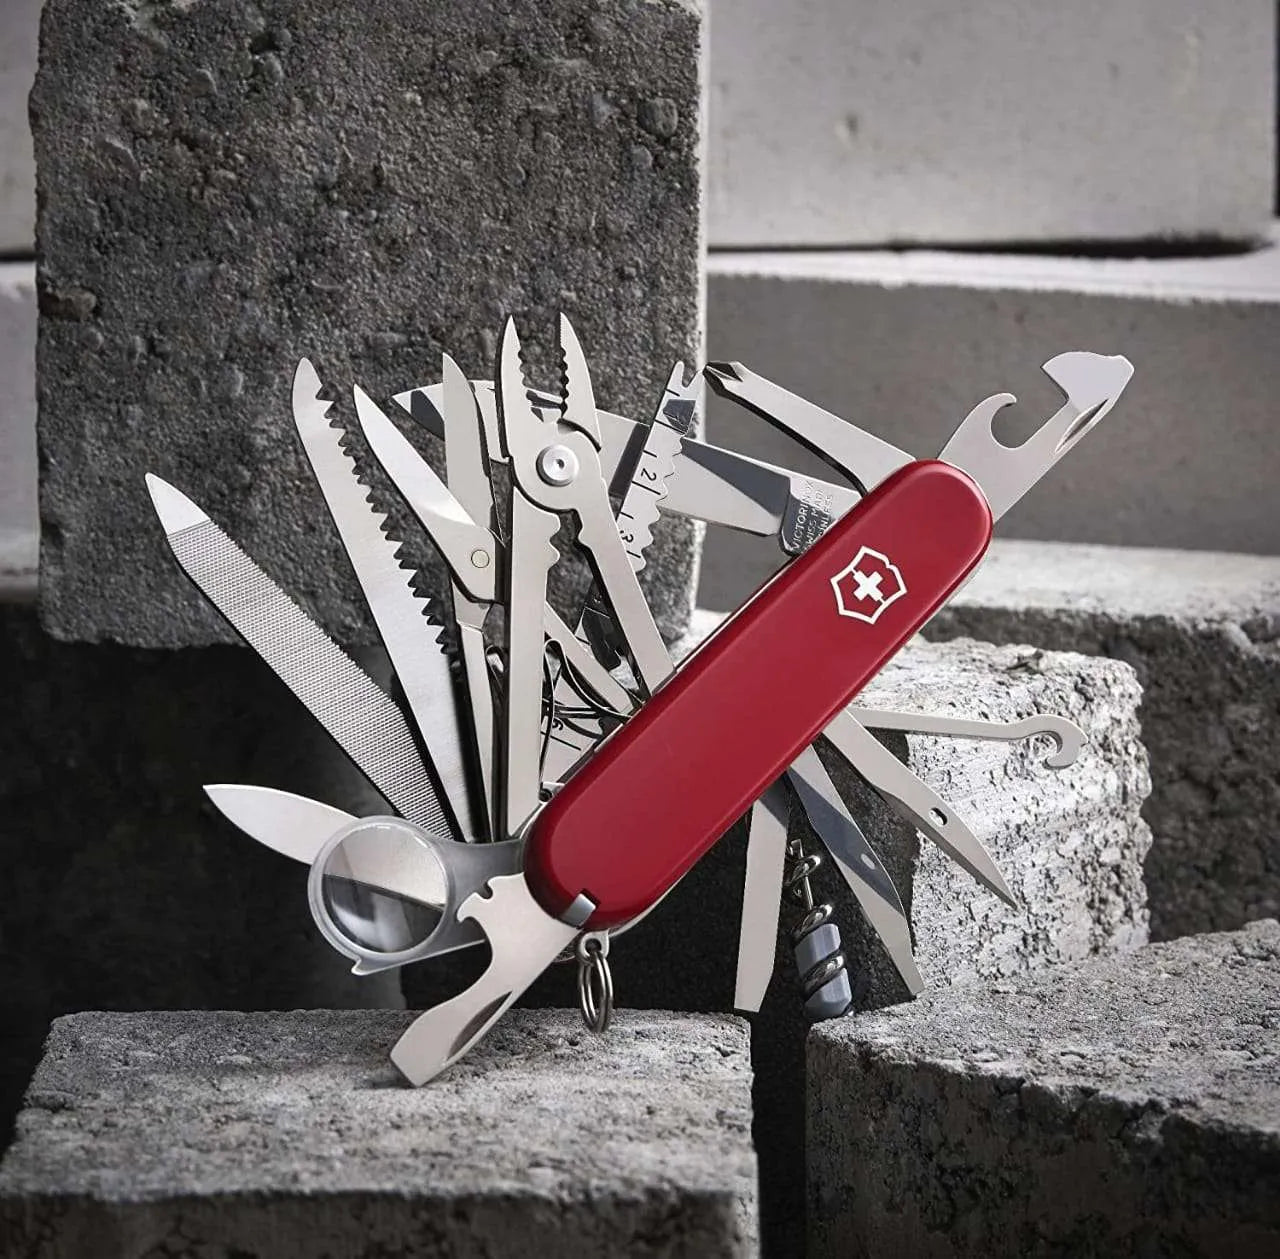 Victorinox Swiss Army Knife – Swiss Champ – 33 Functions, DO-IT-YOURSELF Champion, Multitool and Survival Gadget – Red, 91 mm